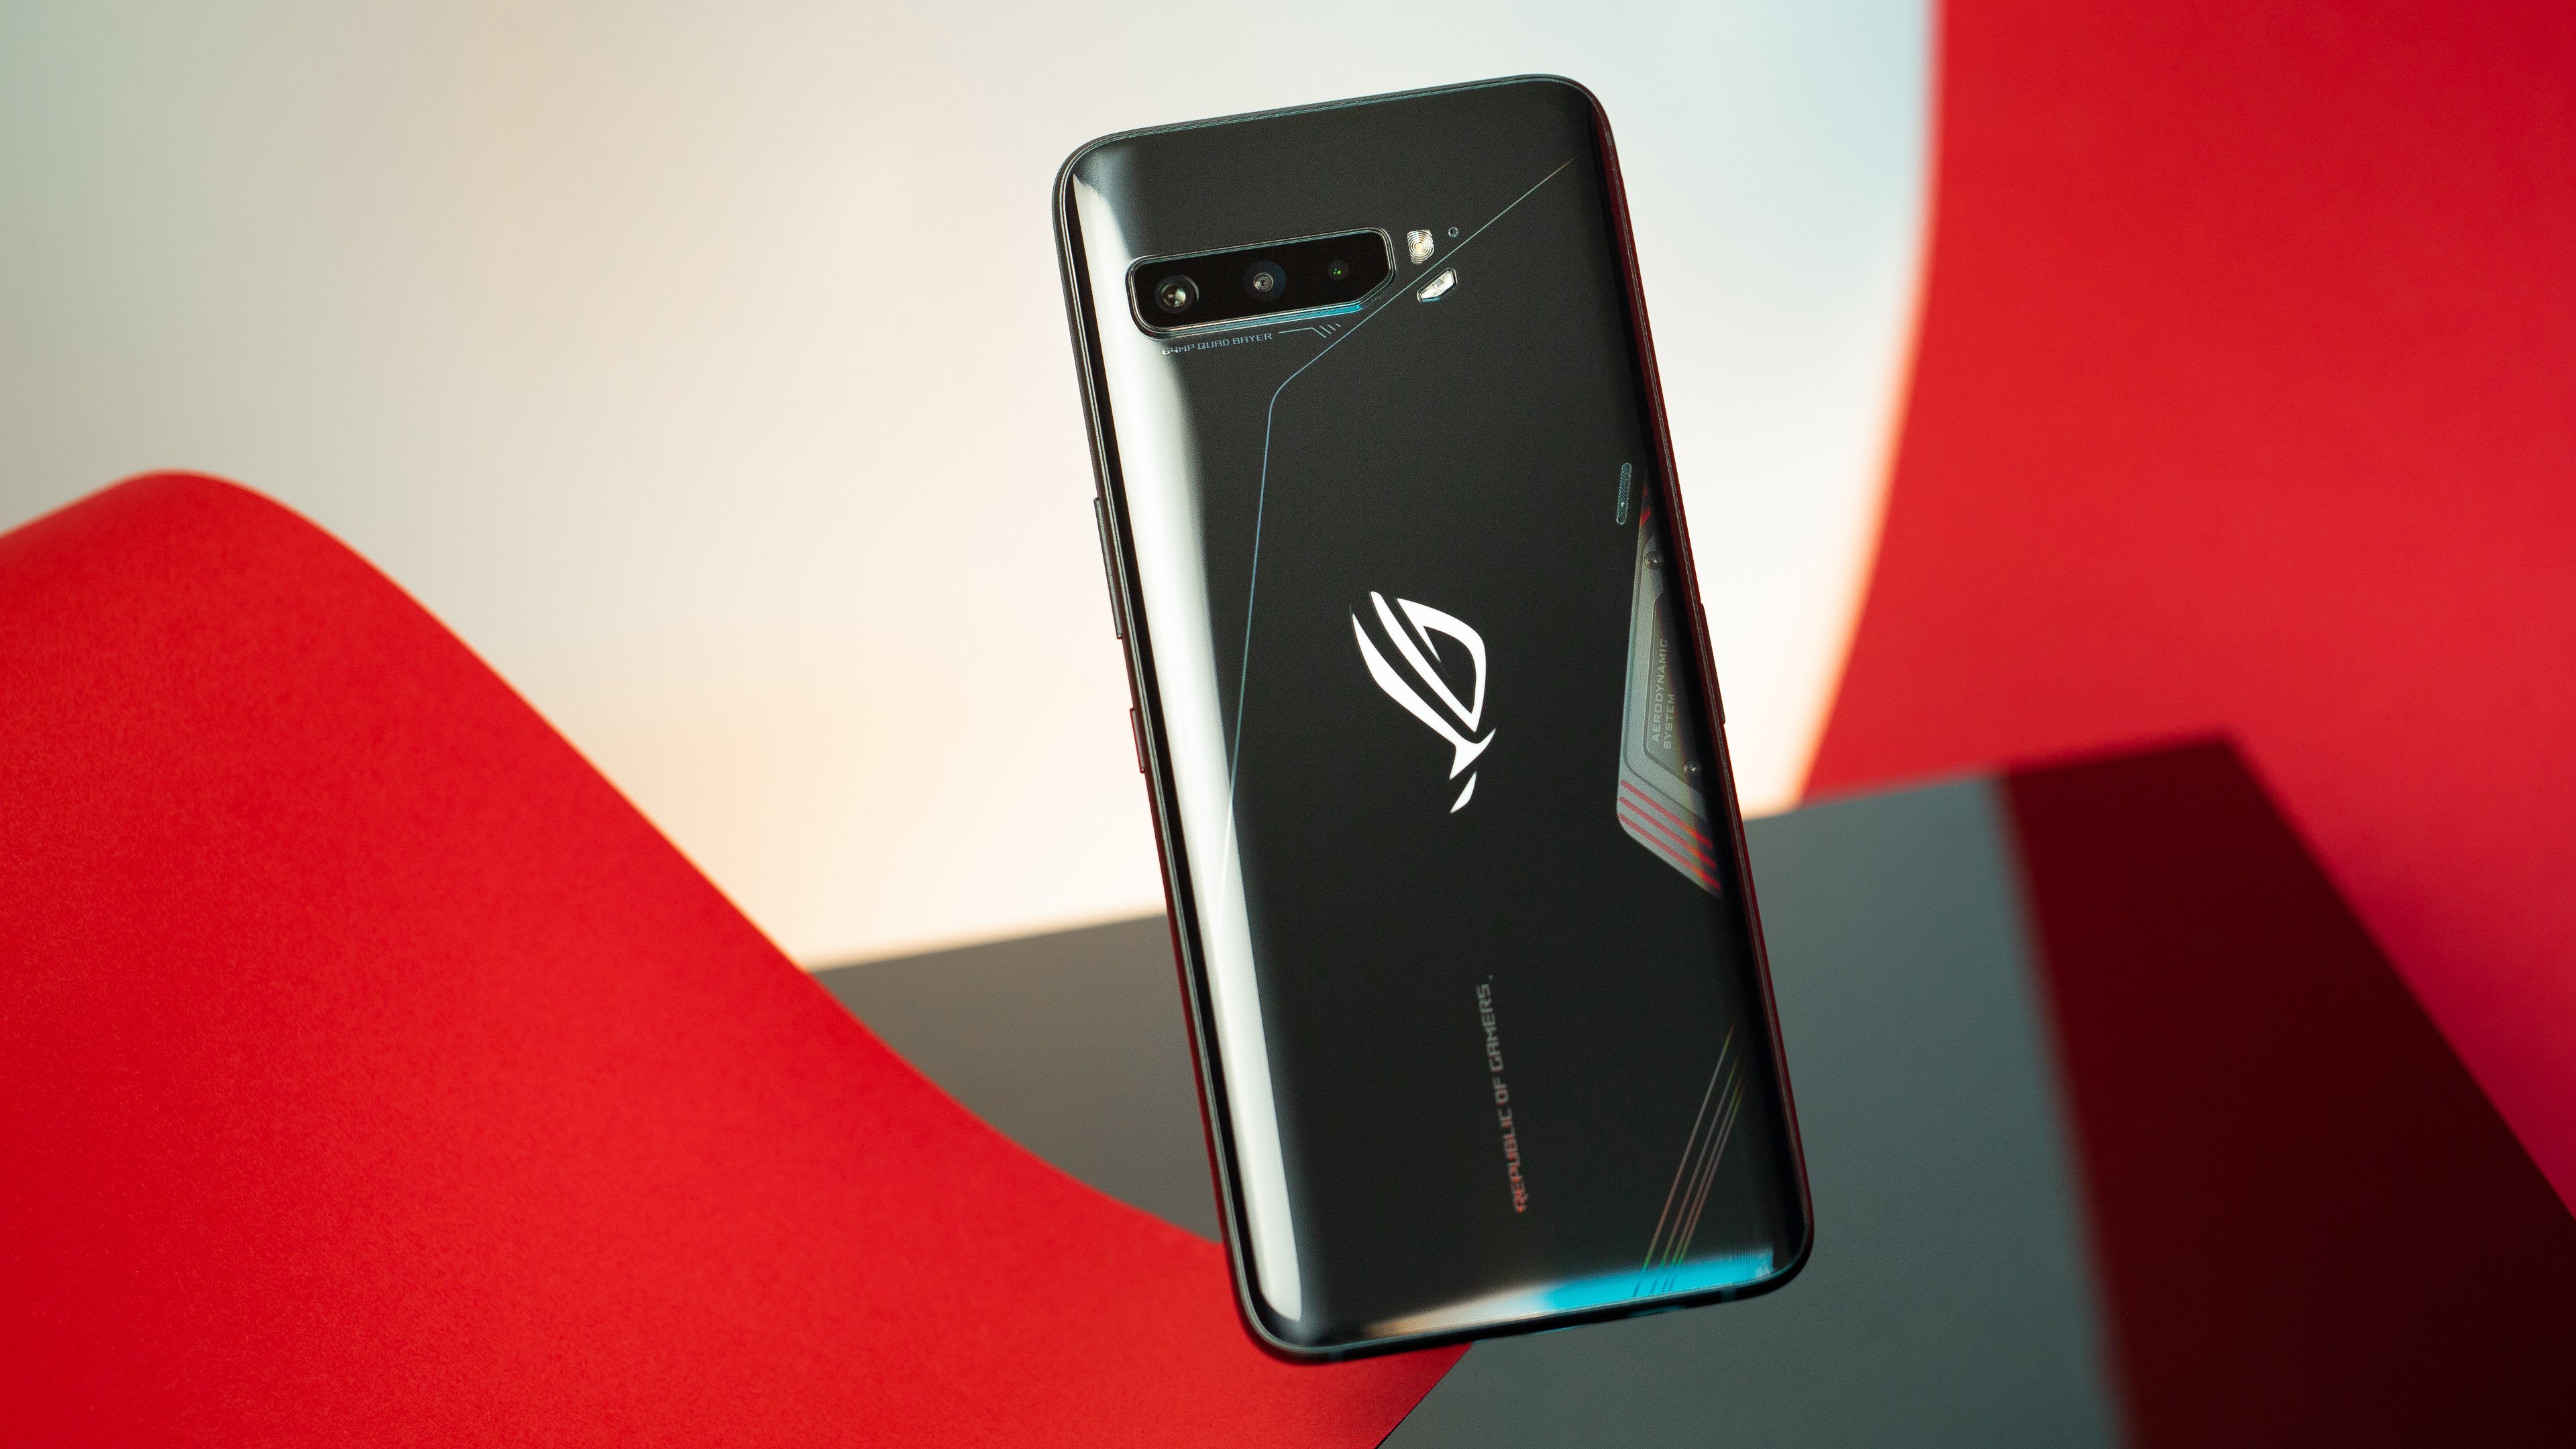 ASUS ROG Phone 2 Review: Pushing The Envelope Of Smartphone Gaming - Tech